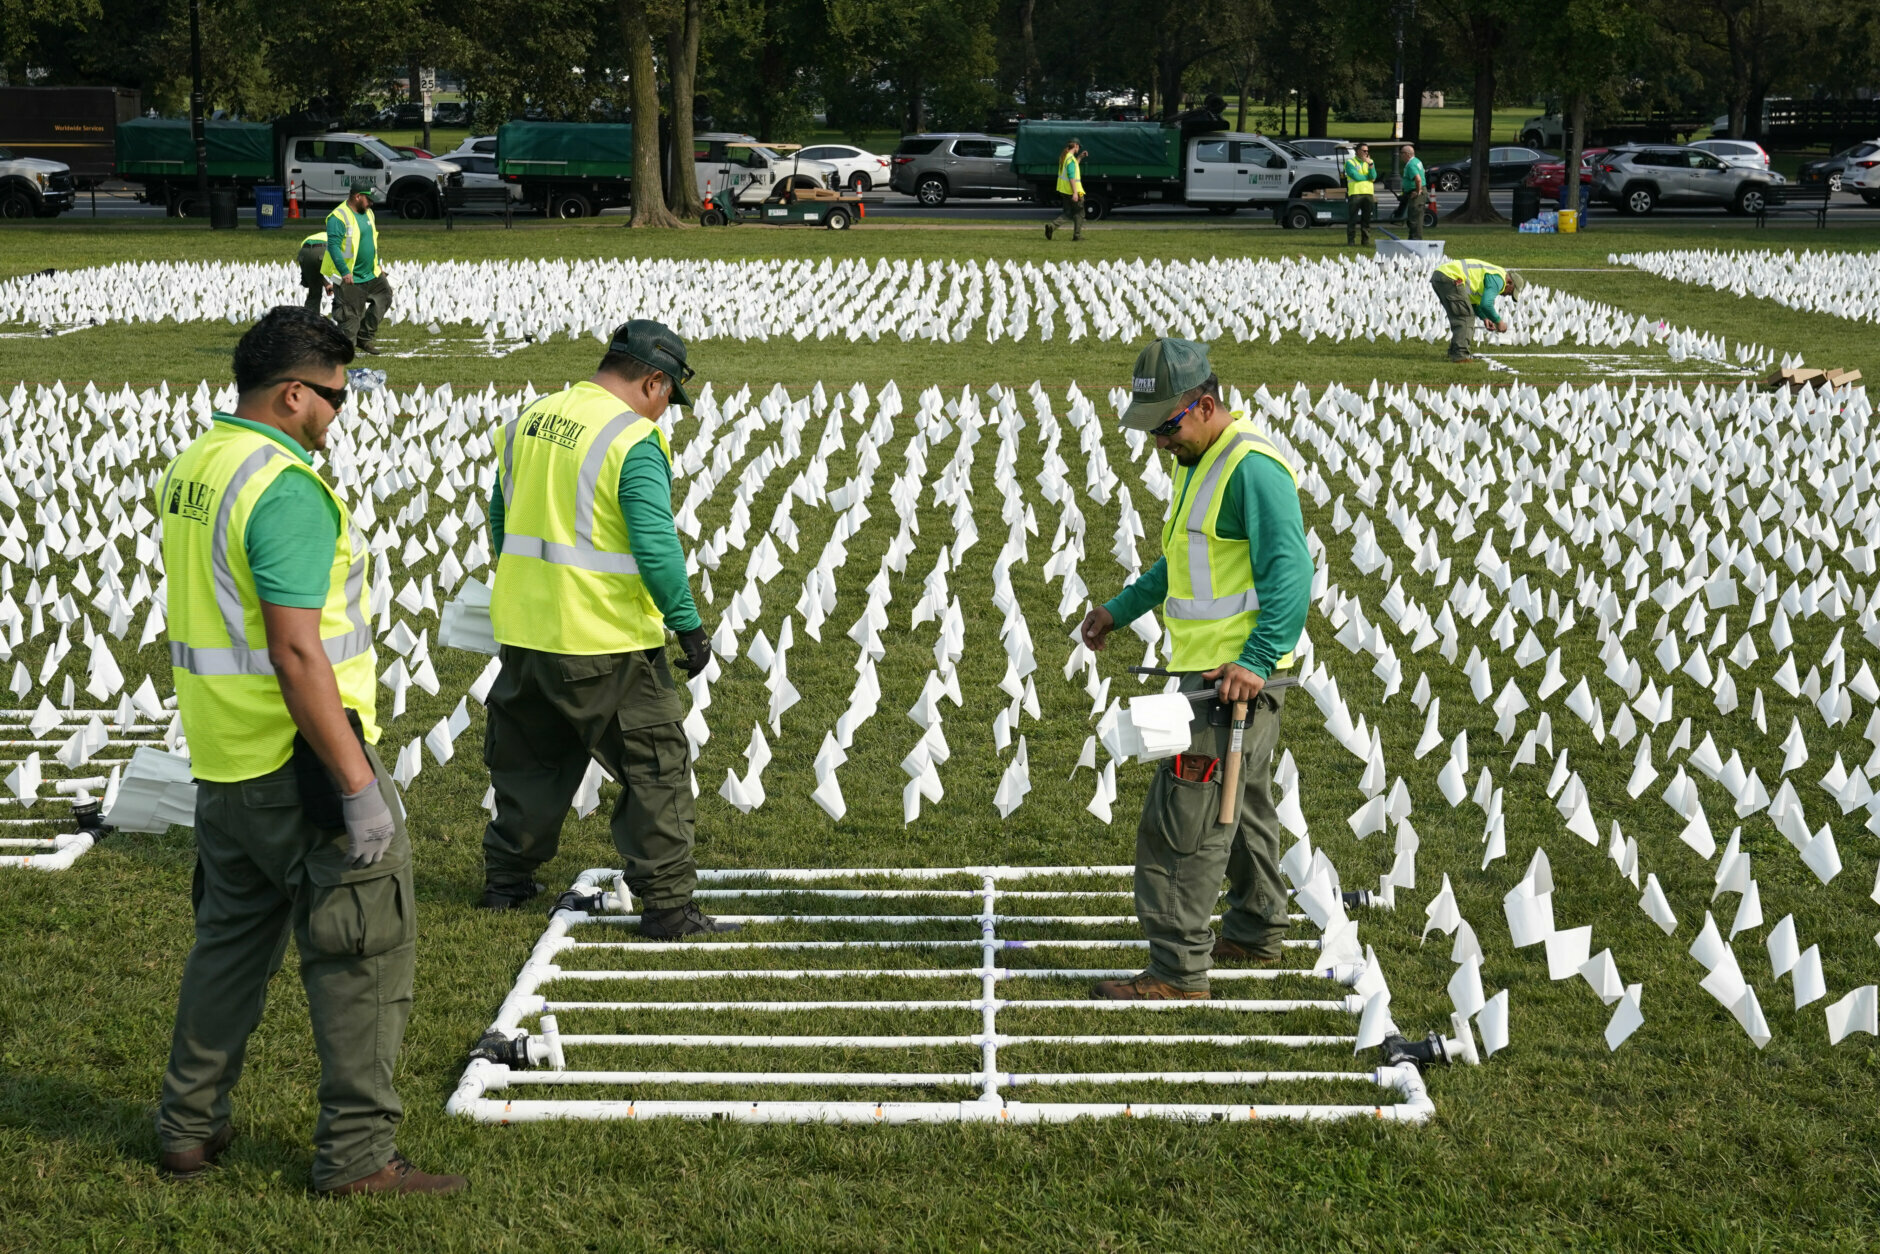 Workers plant white flags as part of artist Suzanne Brennan Firstenberg's temporary art installation, "In America: Remember," in remembrance of Americans who have died of COVID-19, on the National Mall in Washington, Tuesday, Sept. 14, 2021. The installation will consist of more than 630,000 flags when completed. (AP Photo/Patrick Semansky)